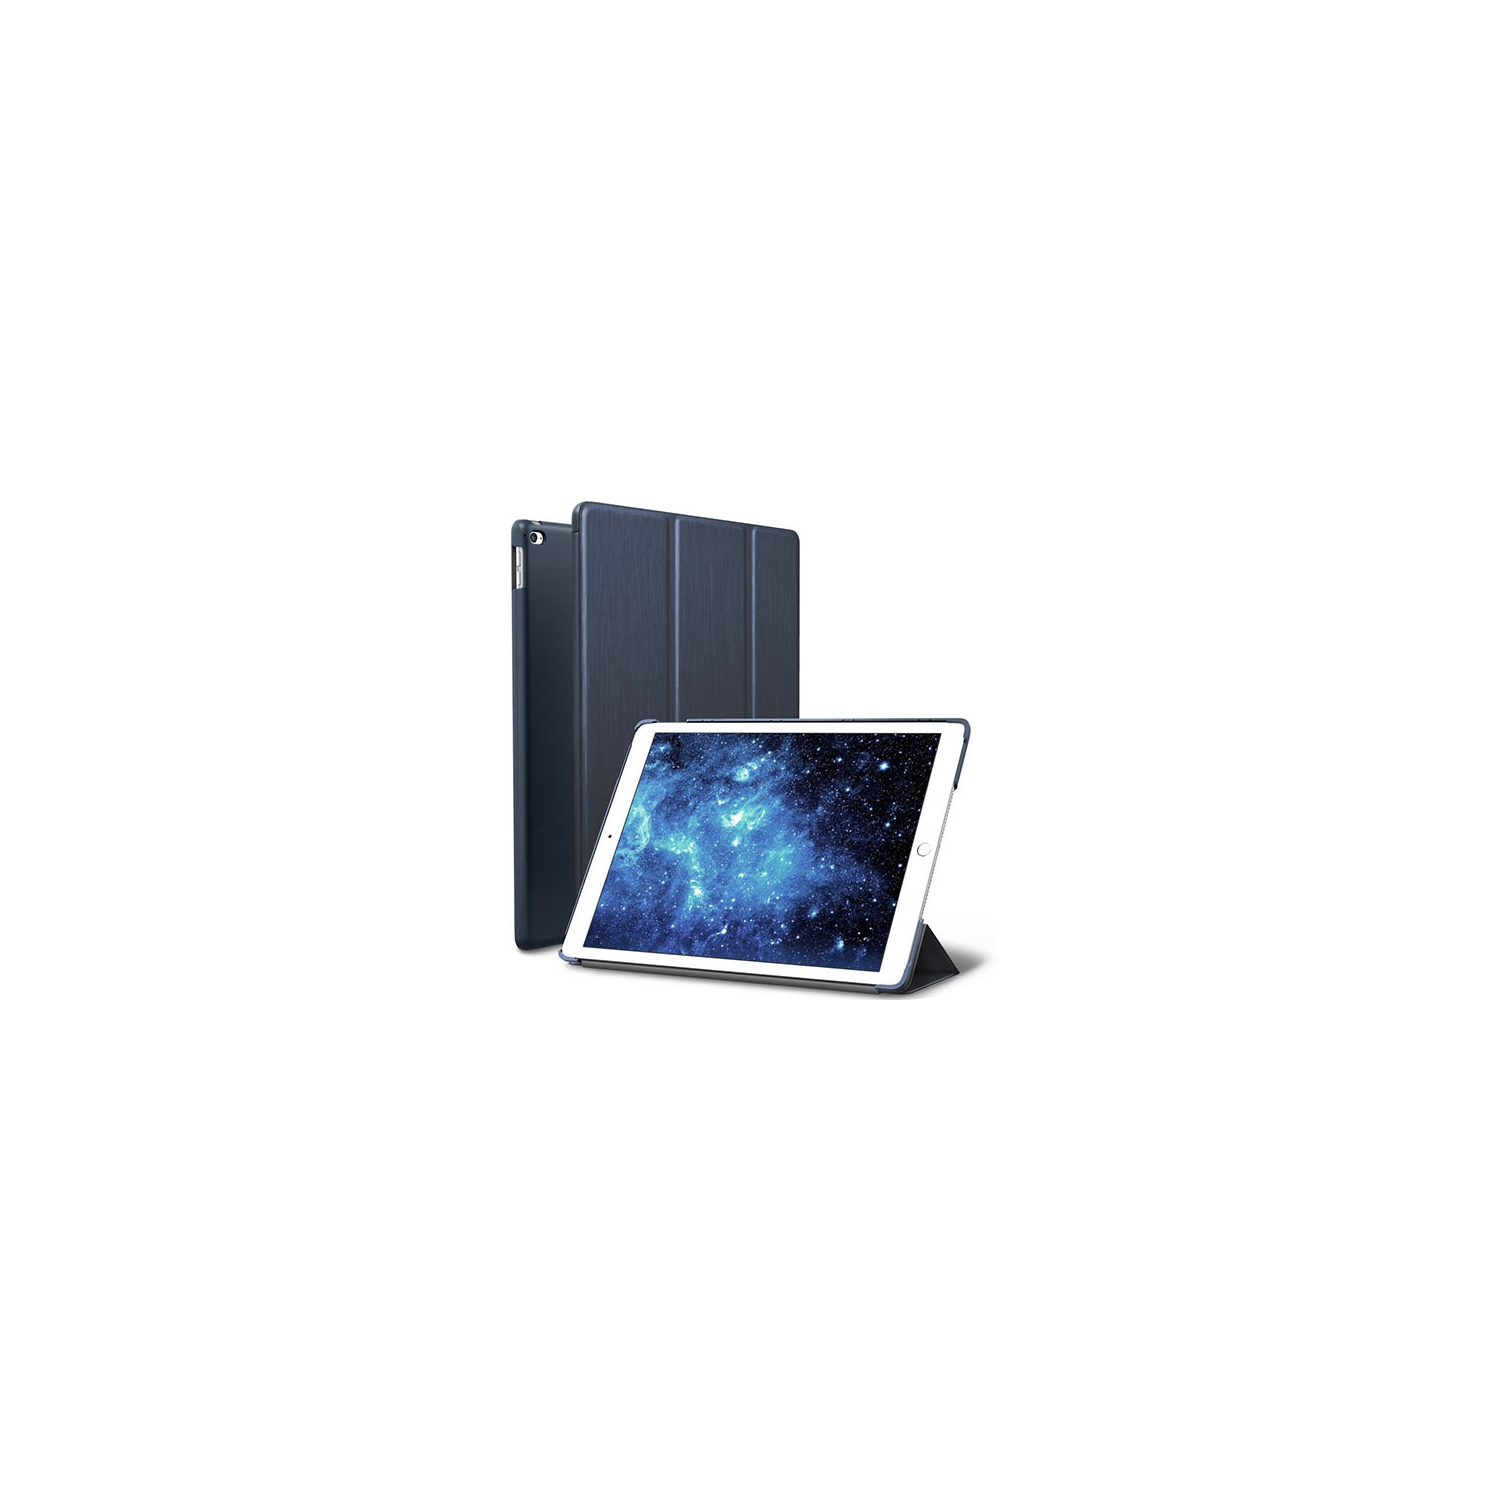 【CSmart】 Slim Magnetic Smart Cover Stand Case for iPad 5th 6th Gen / Air 1 2 1st 2nd Gen (9.7"), Navy